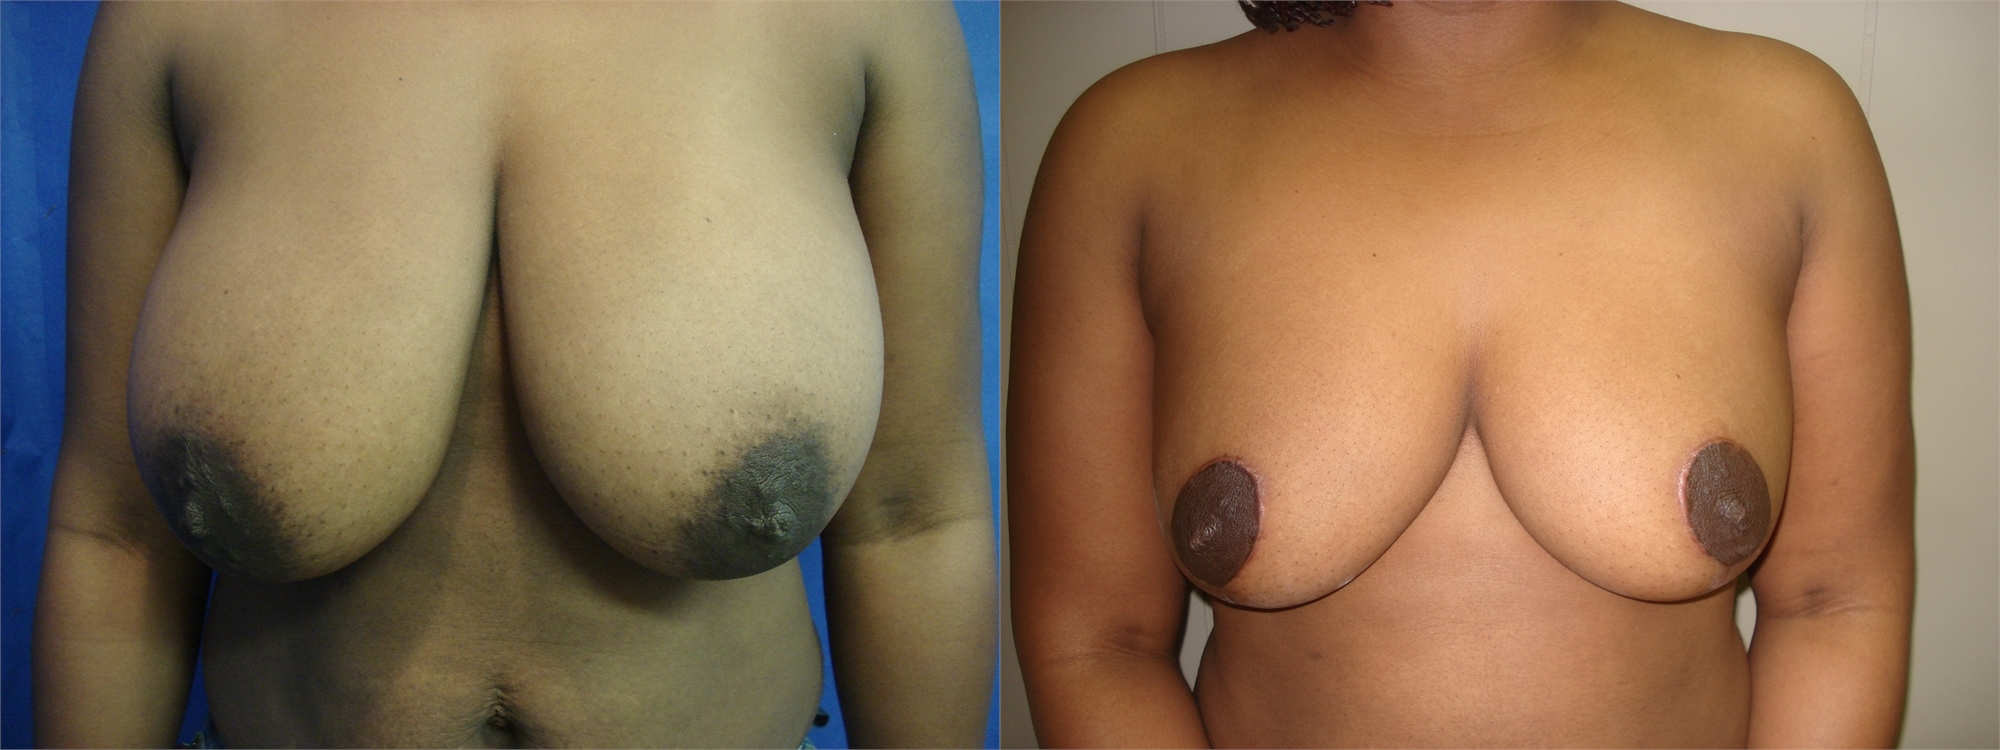 Breast Lift Before and After Seattle and Tacoma, WA